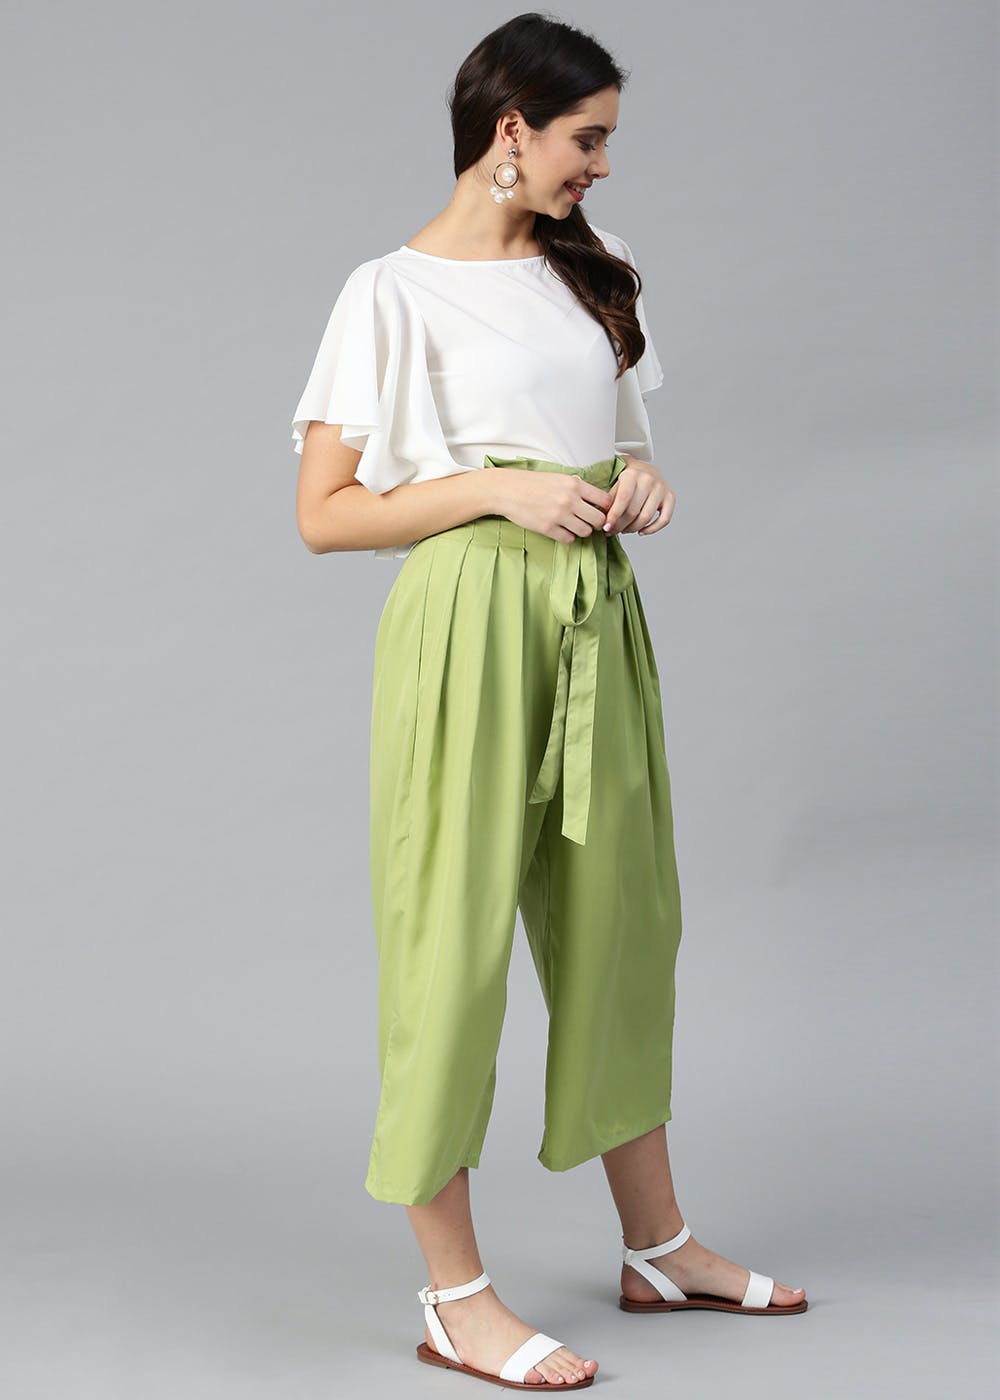 Get Off White Flared Ruffle Top & Trouser Set at ₹ 1049